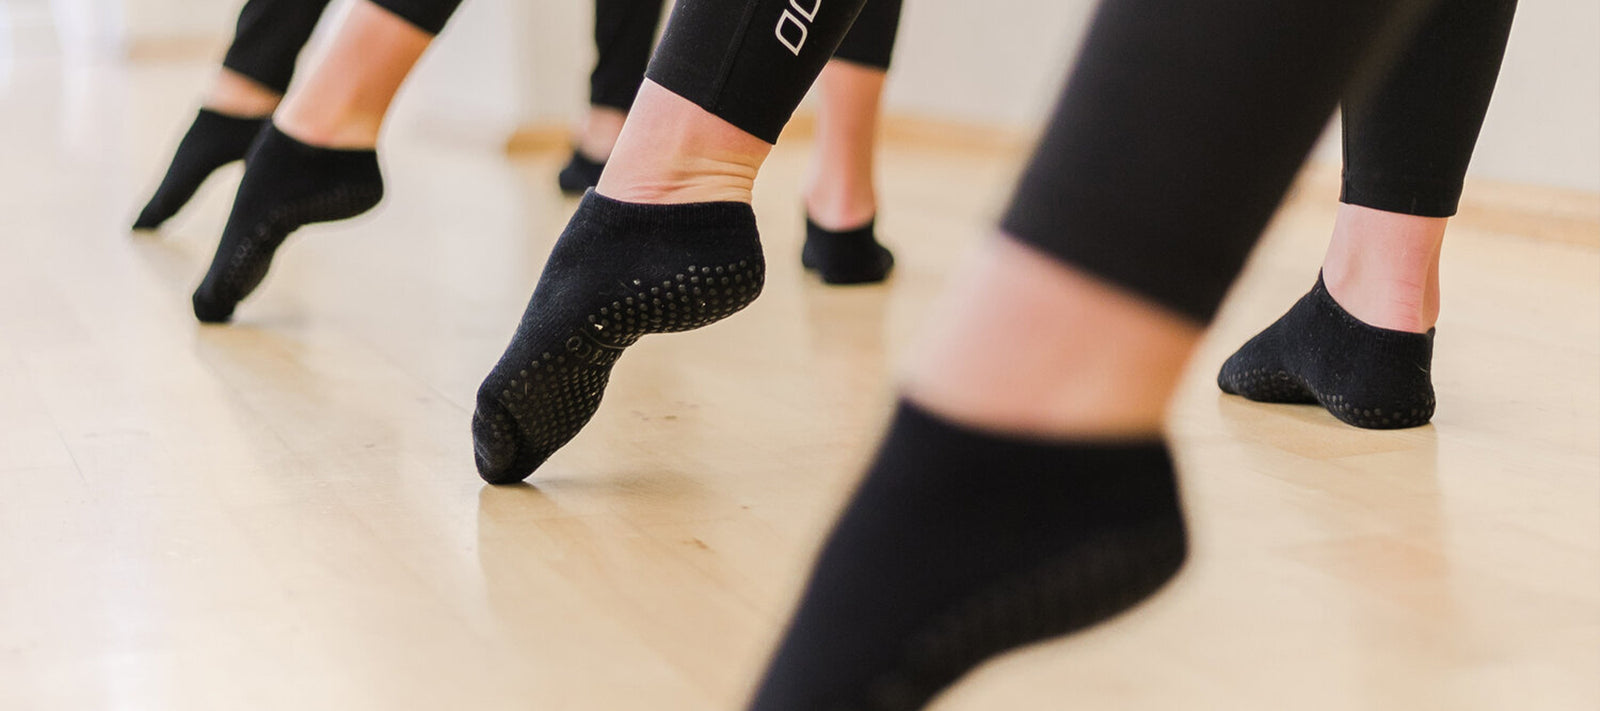 What is the point of wearing grip socks on barre classes